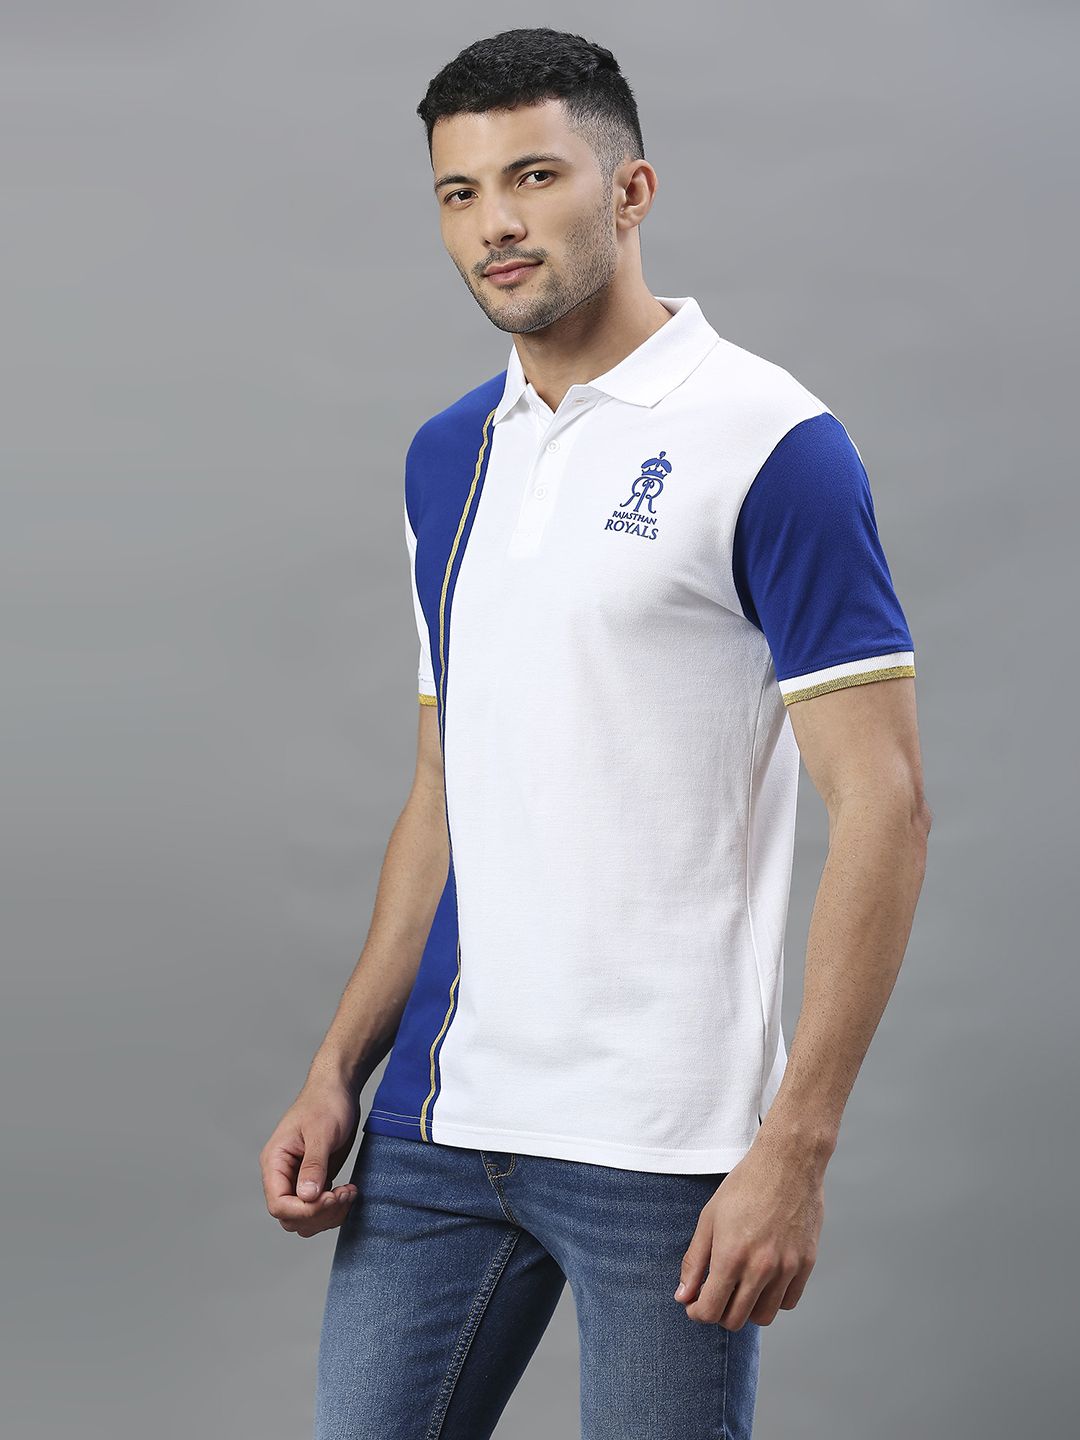 Buy Men White Printed Polo Collar Polos From Fancode Shop.